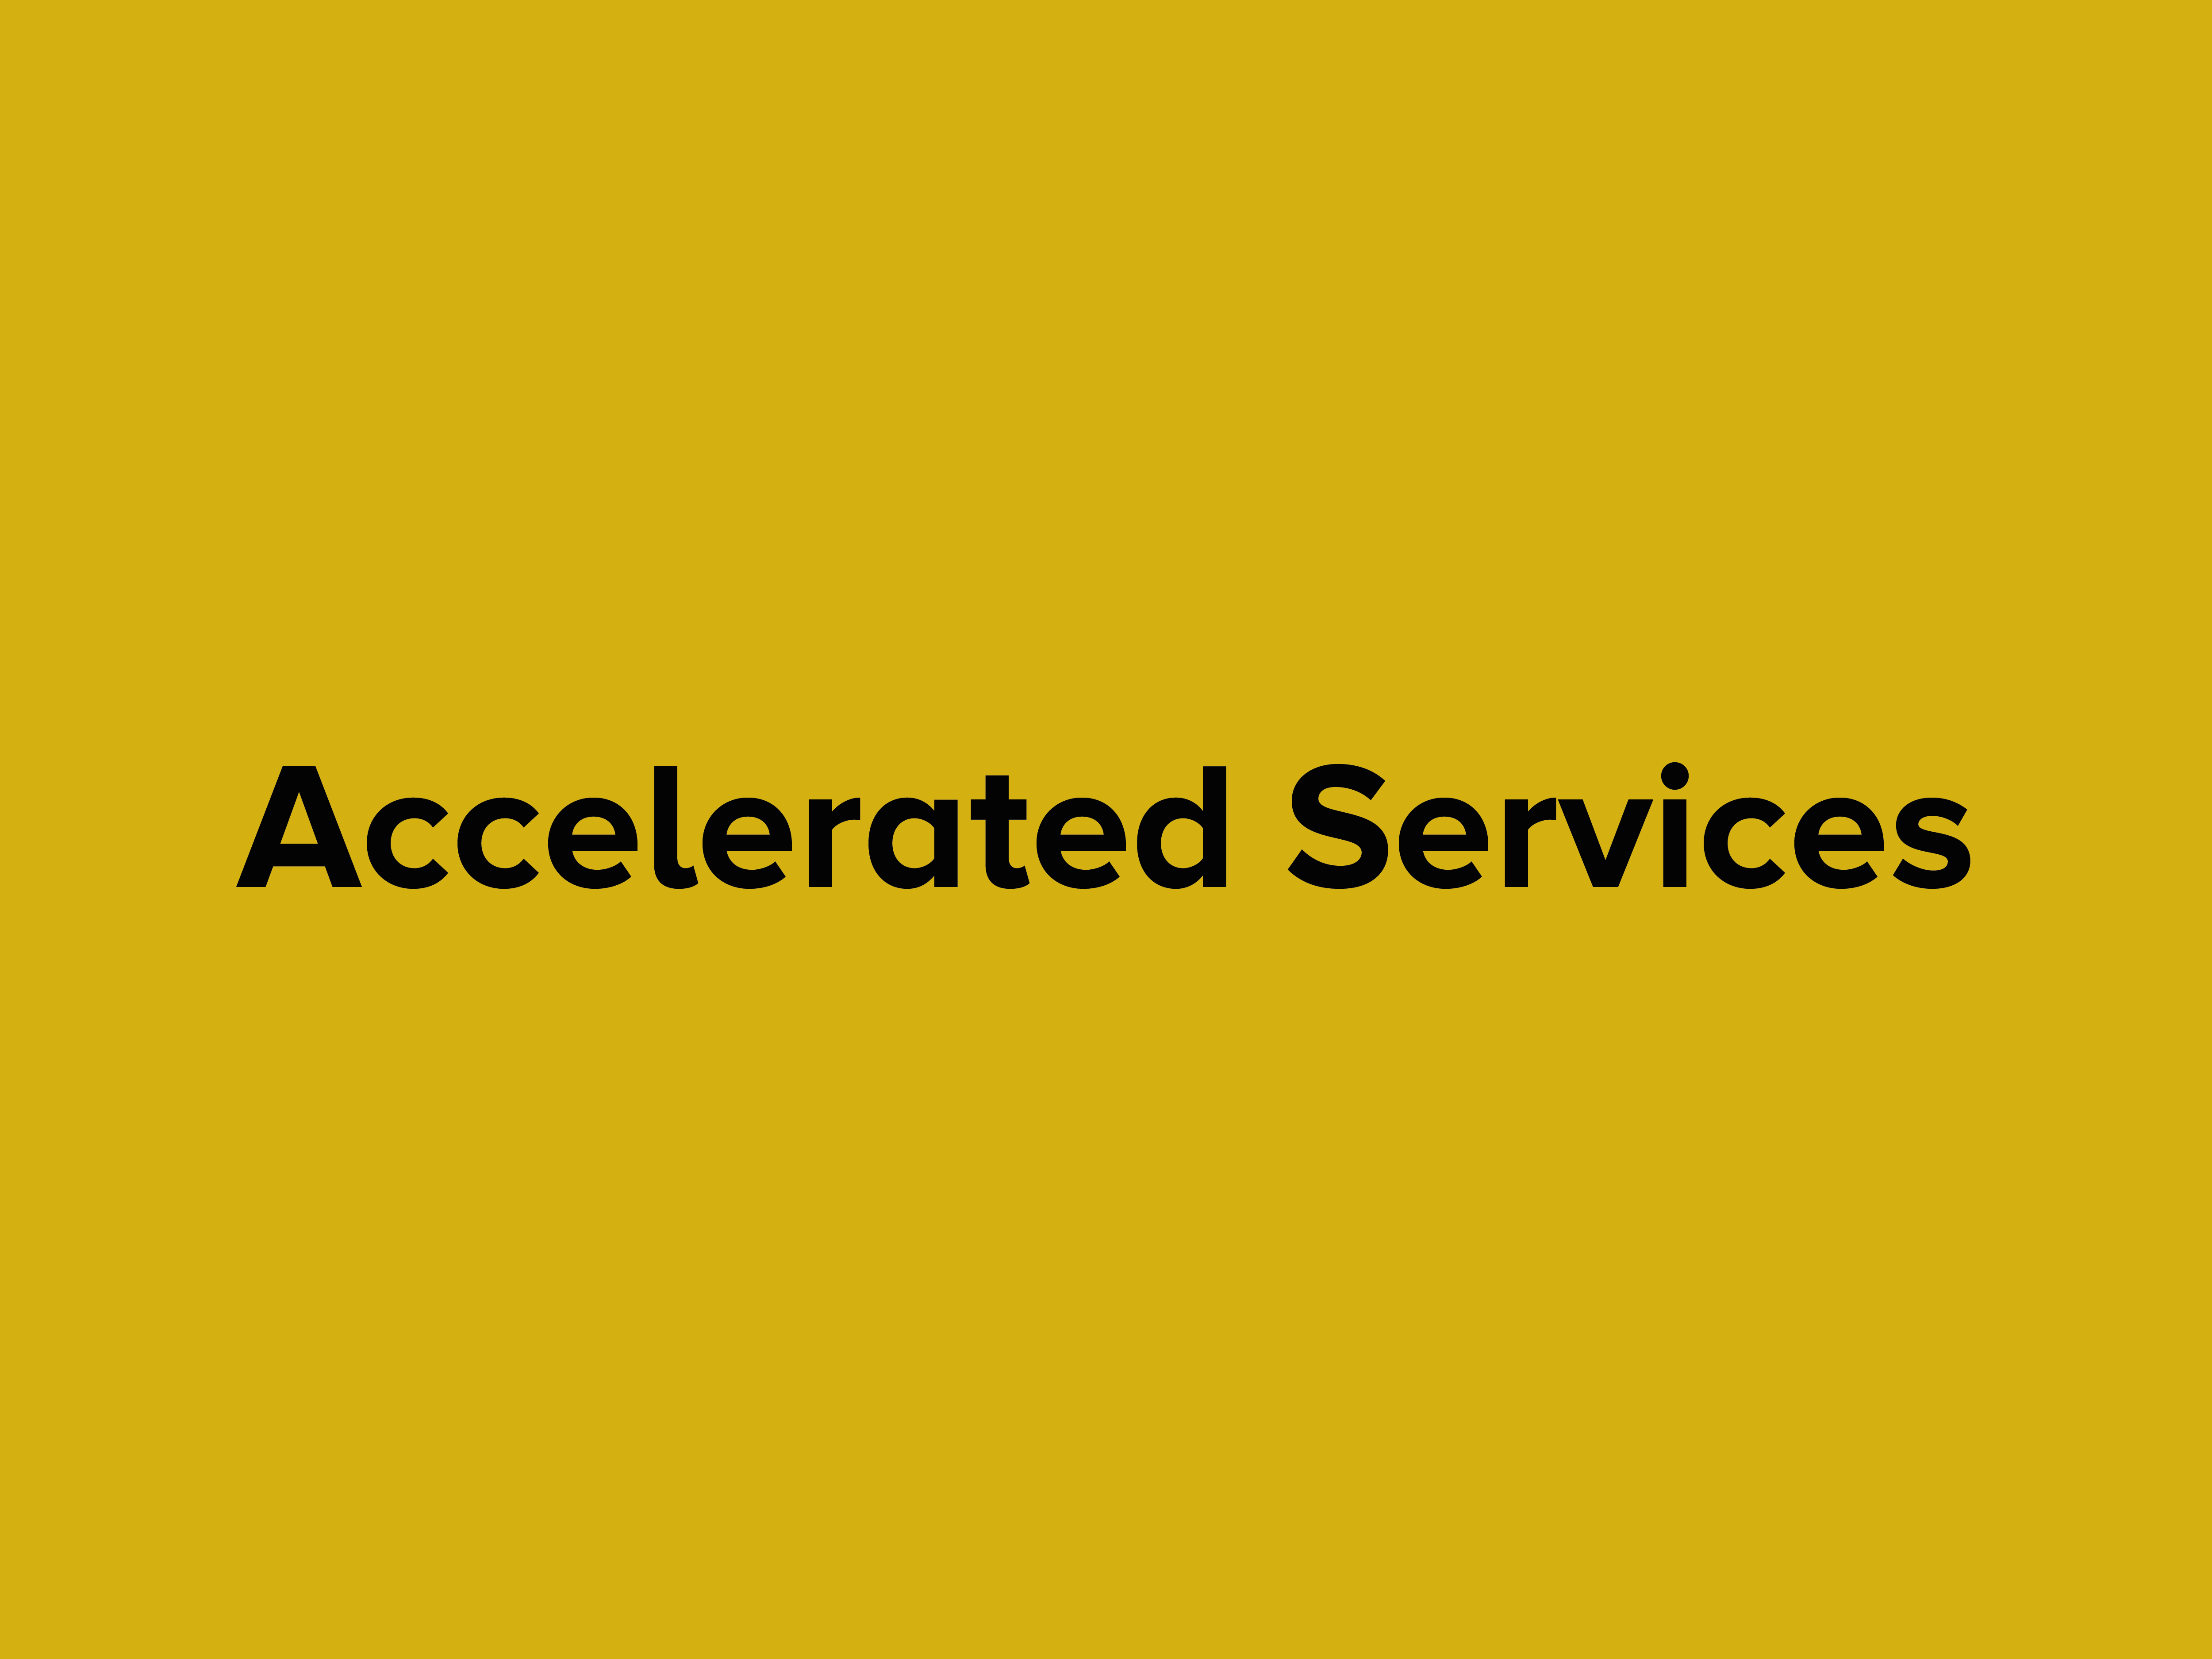 4Accelerated Services